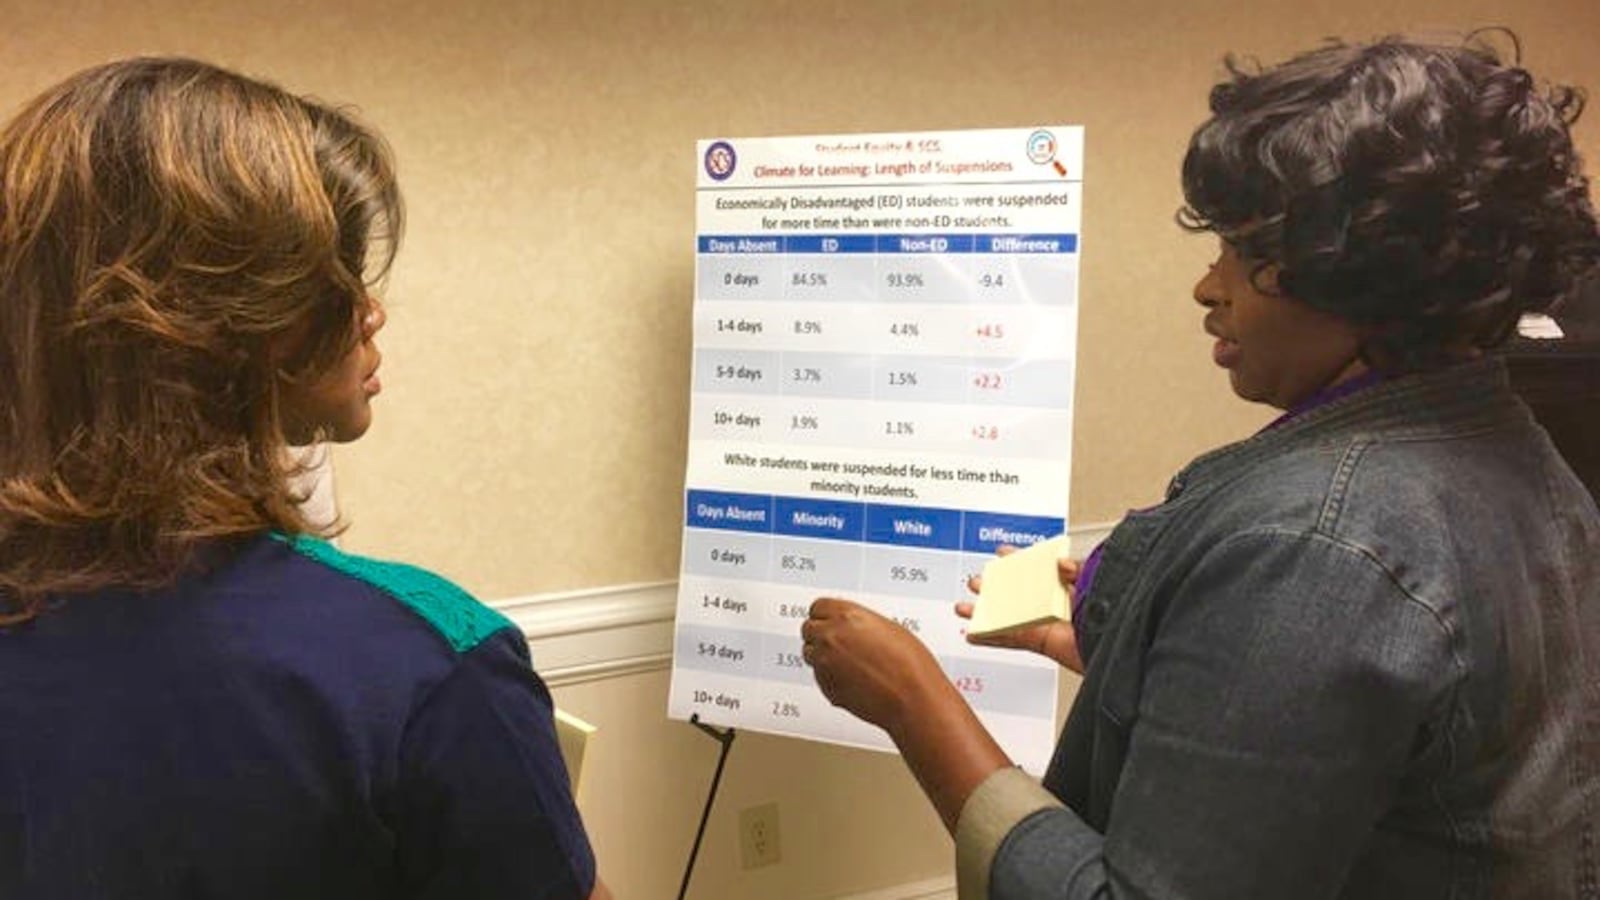 From left: Shelby County school board members Miska Kay Bibbs and Stephanie Love discuss district data in an exercise during a two-day retreat with other district leaders in Memphis.